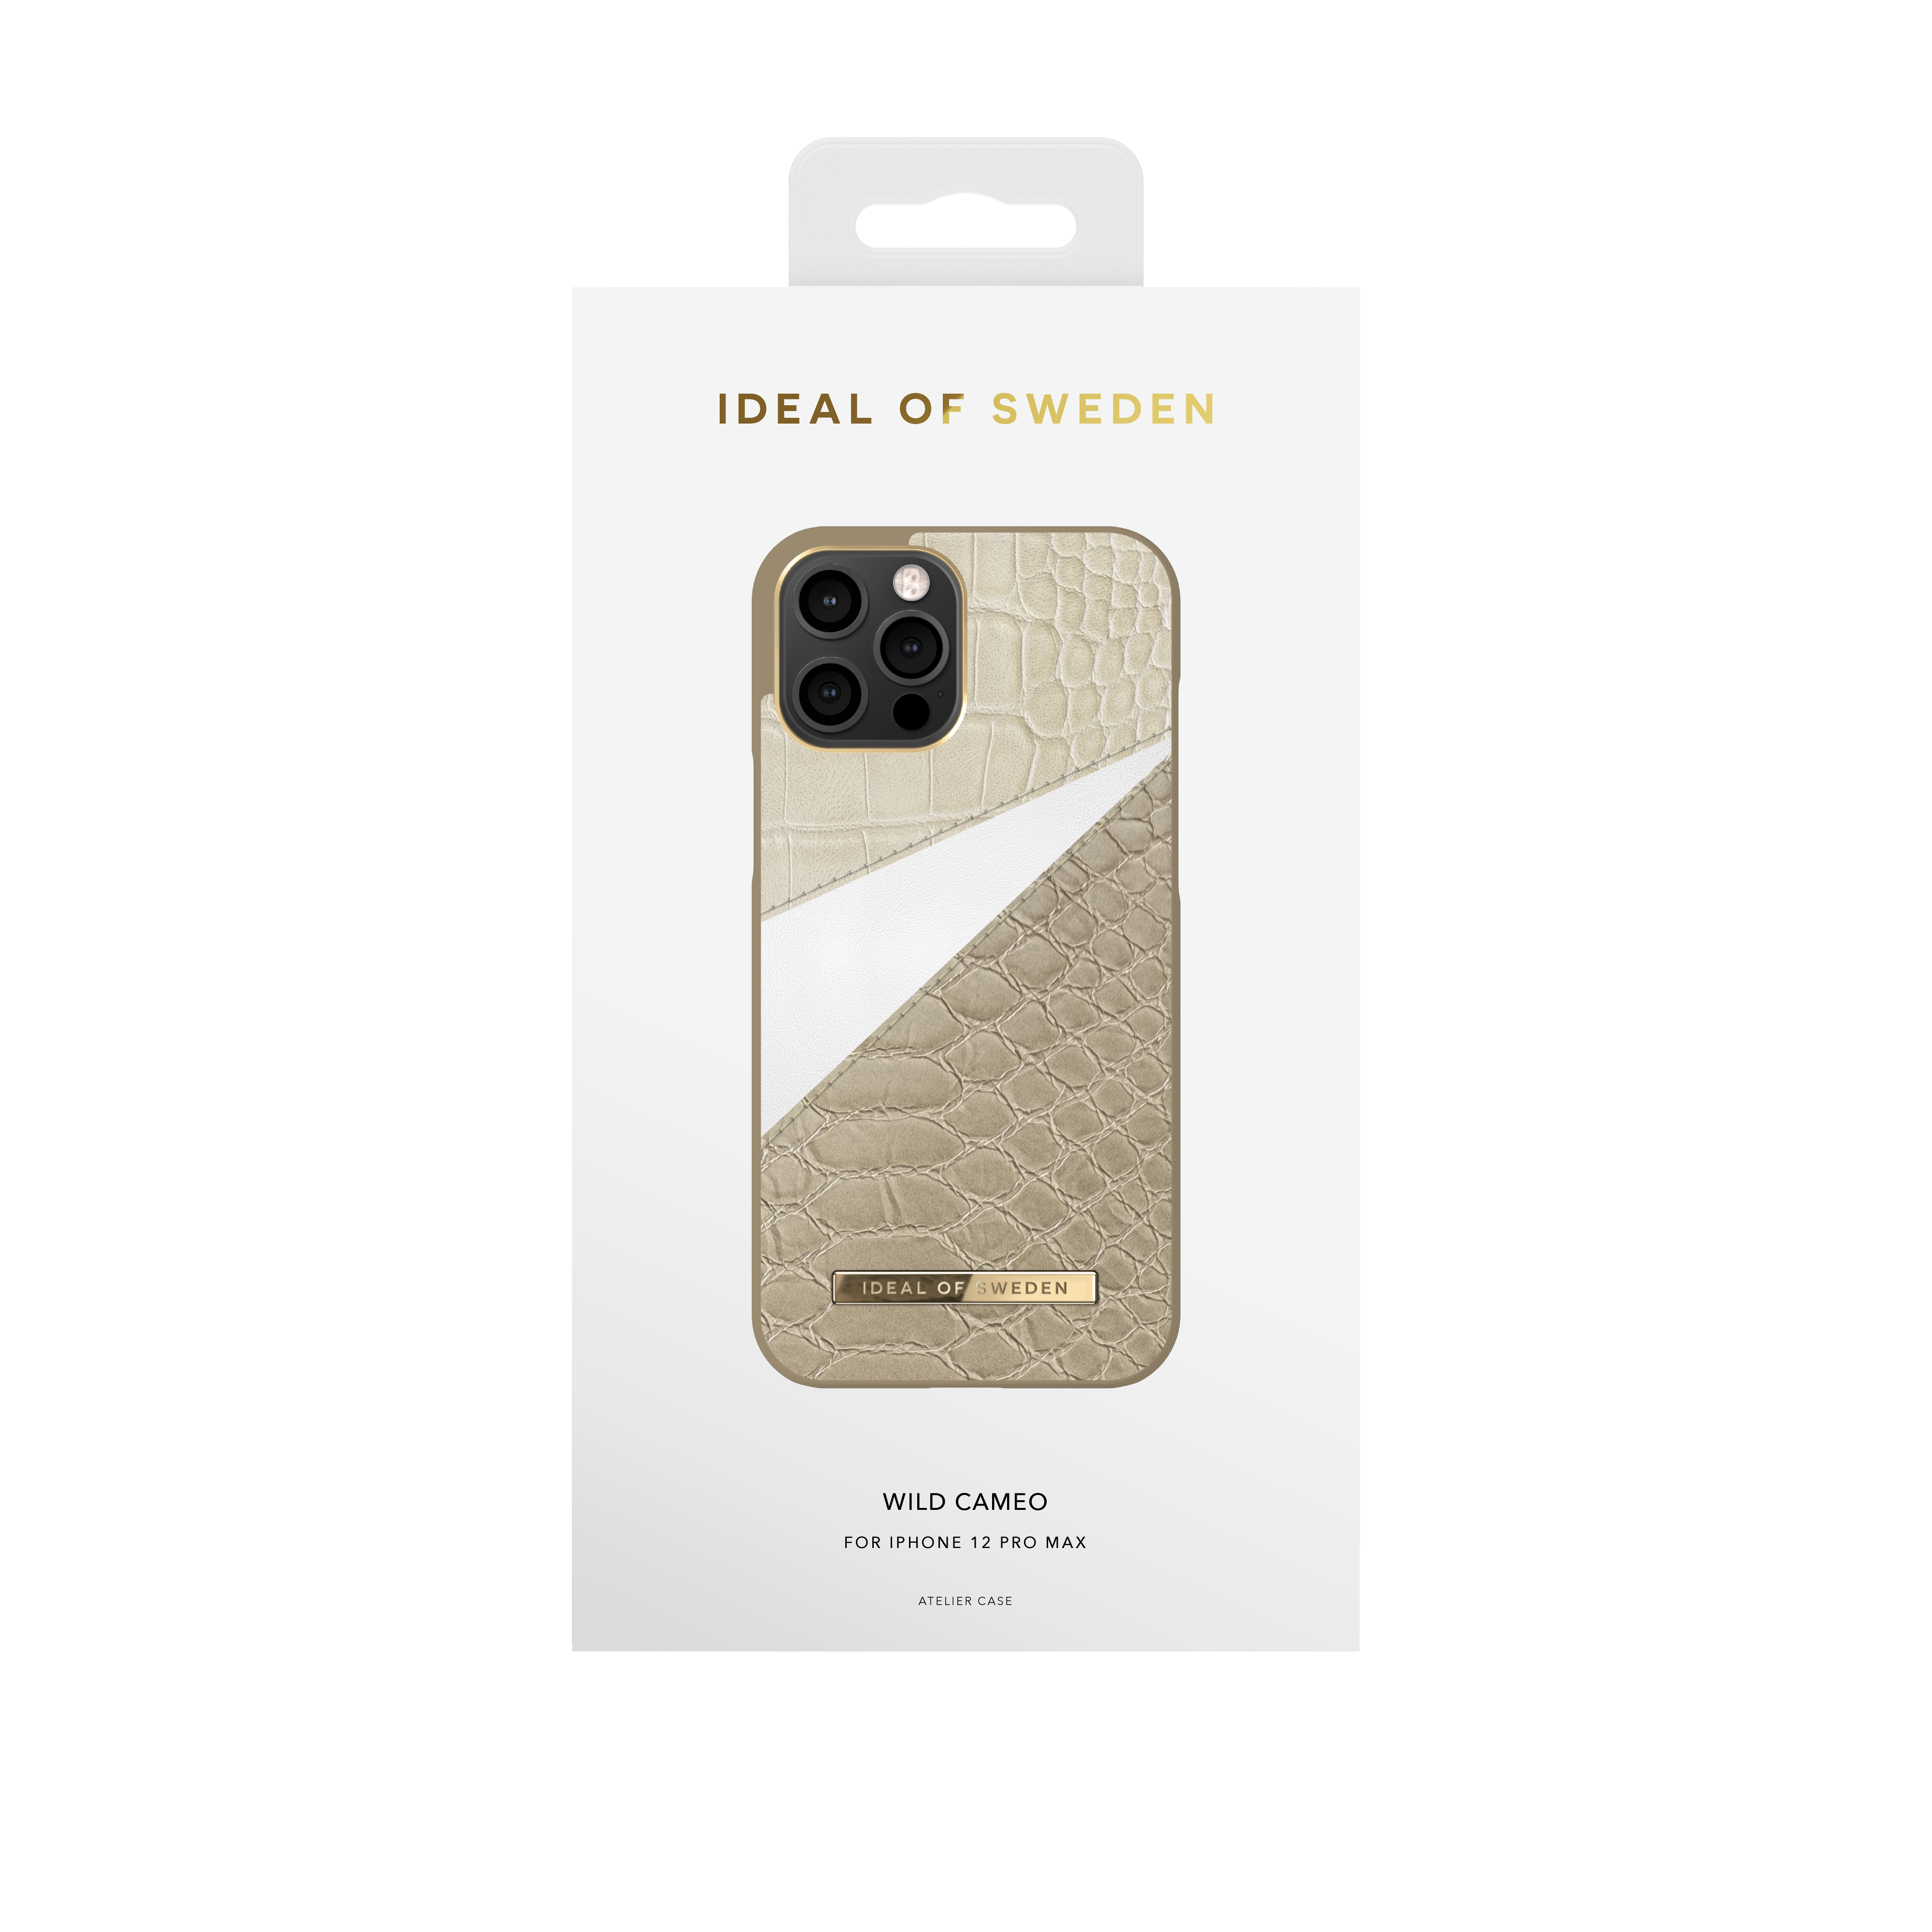 IDEAL OF SWEDEN IDACAW20-2067-246, Backcover, Max, Pro IPhone Cameo 12 Wild Apple